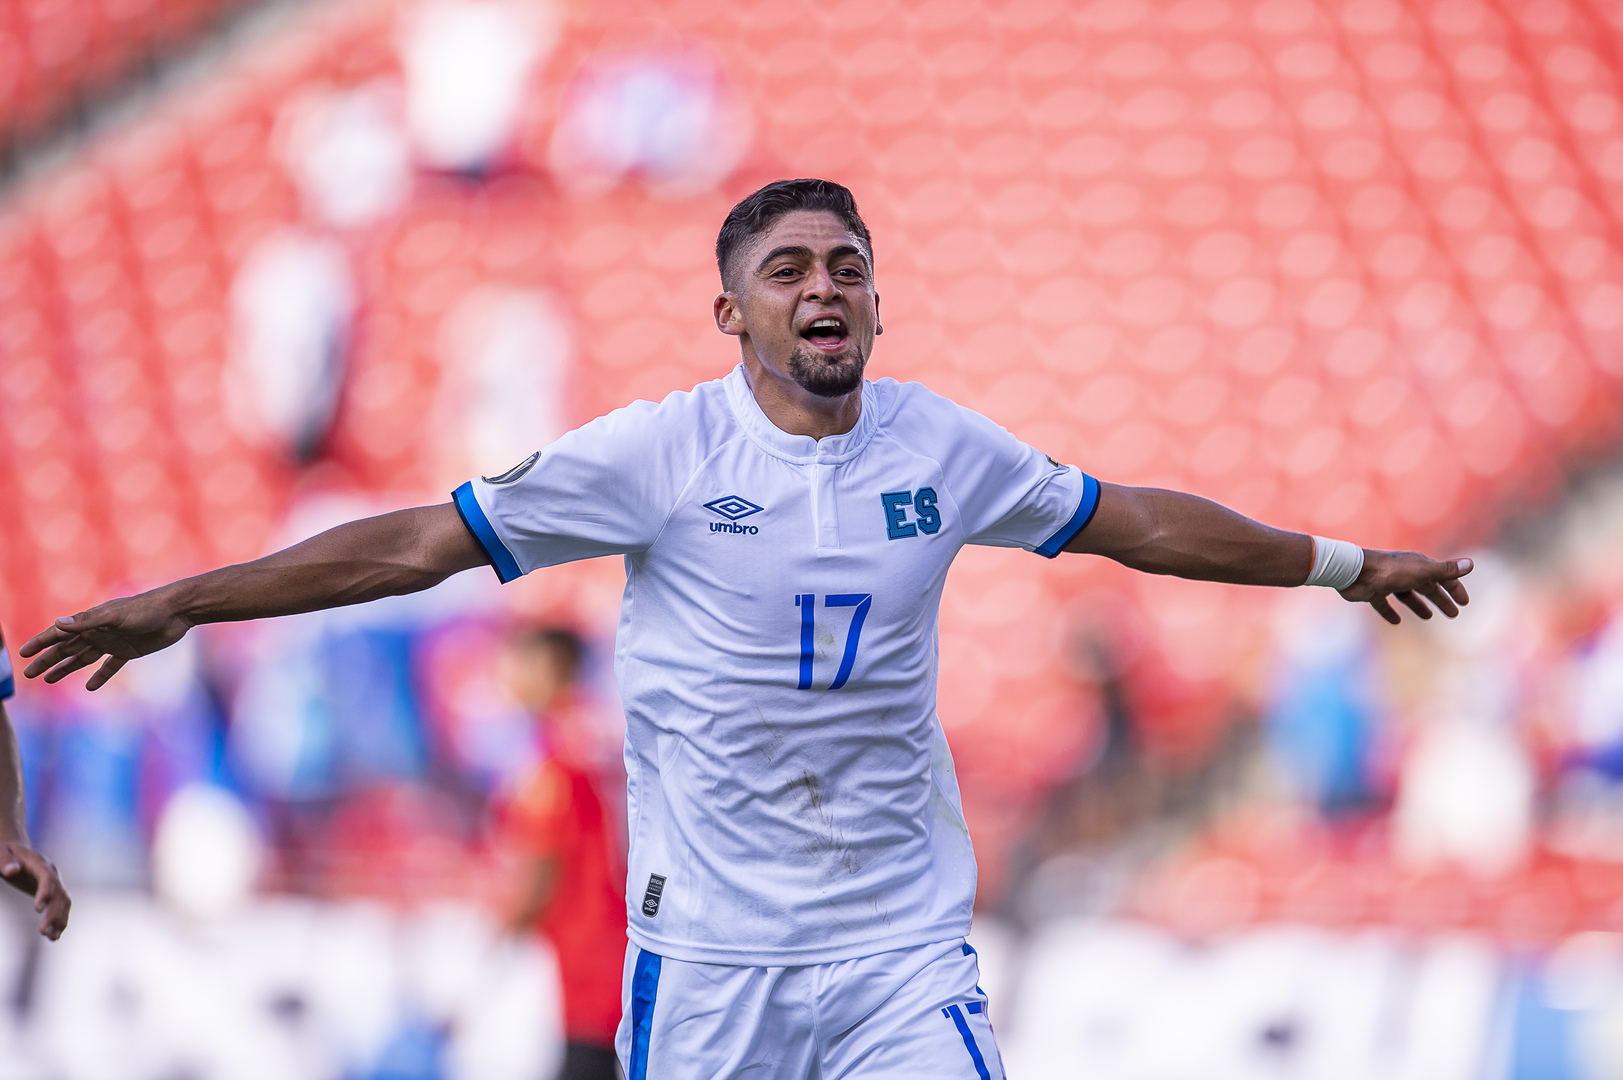 Henriquez relishing first Gold Cup goal: “I’m so thankful”